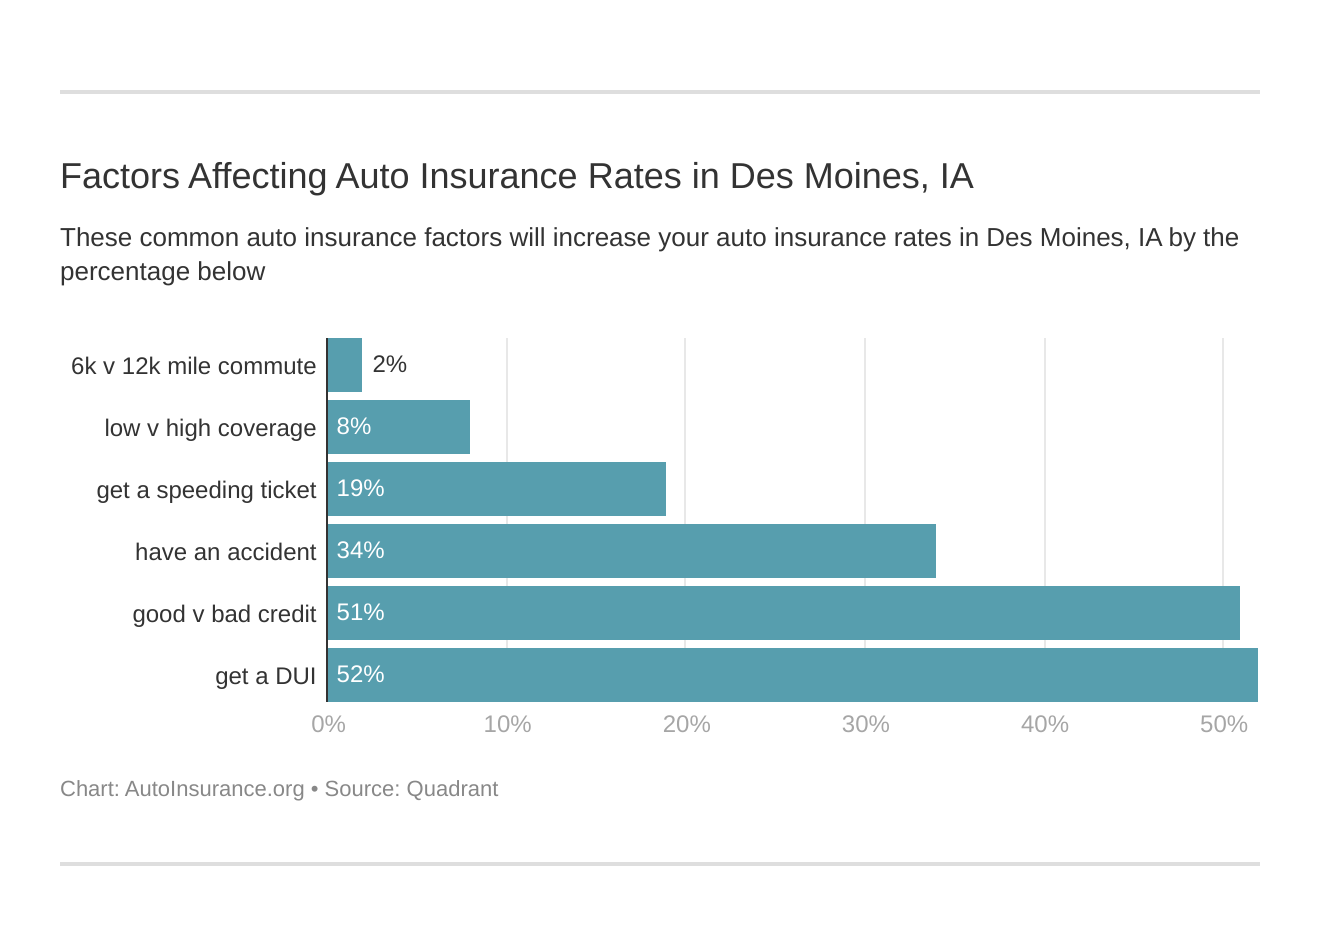 Factors Affecting Auto Insurance Rates in Des Moines, IA